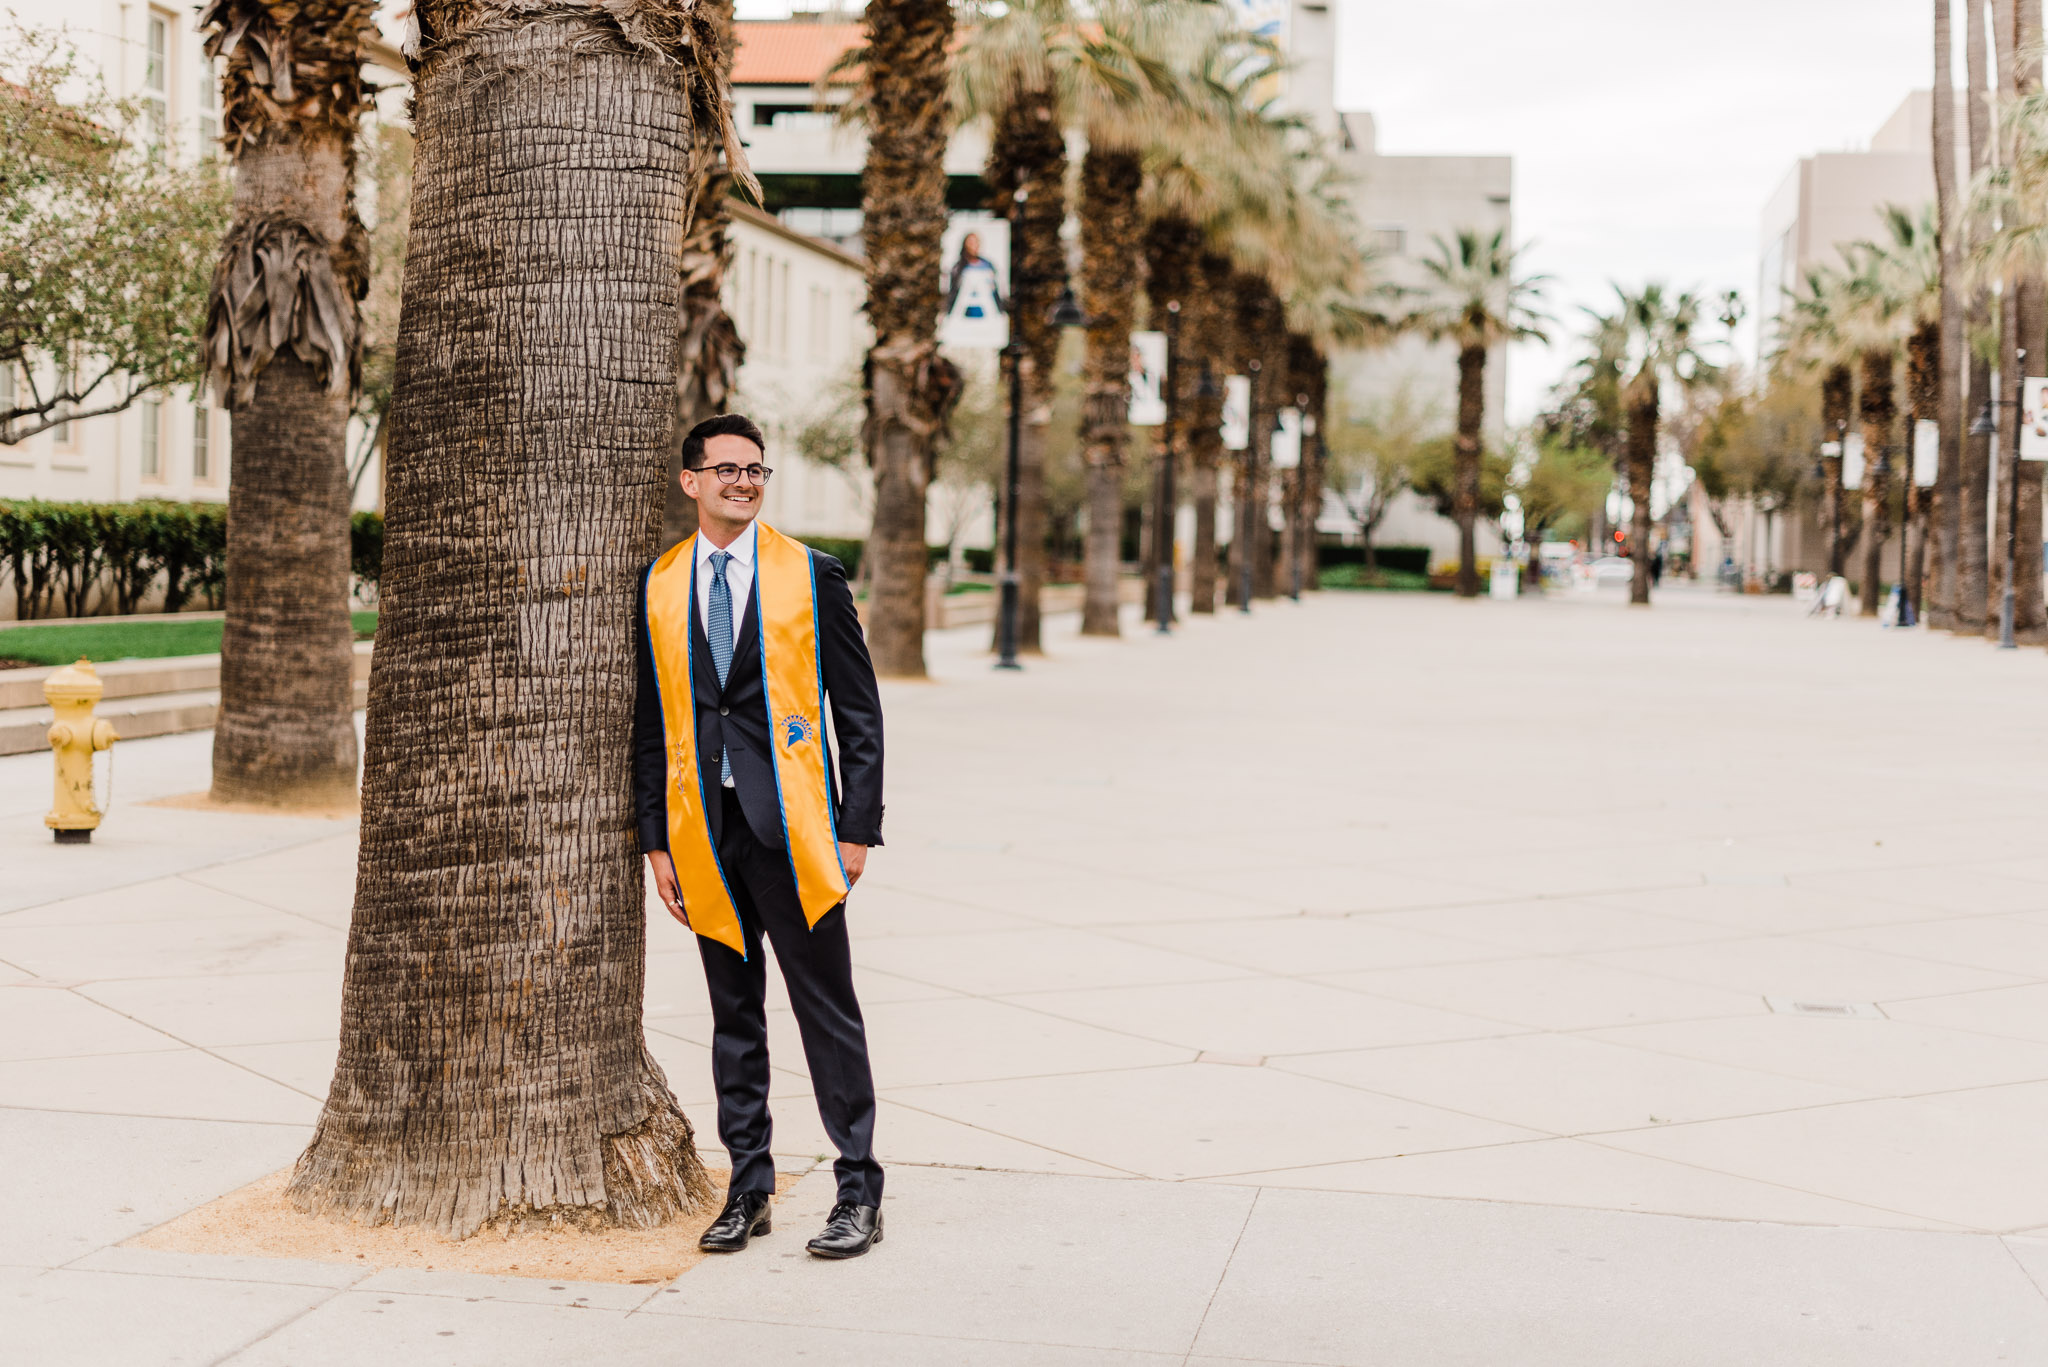 College grad leaning against palm tree, wearing a suite and stole.